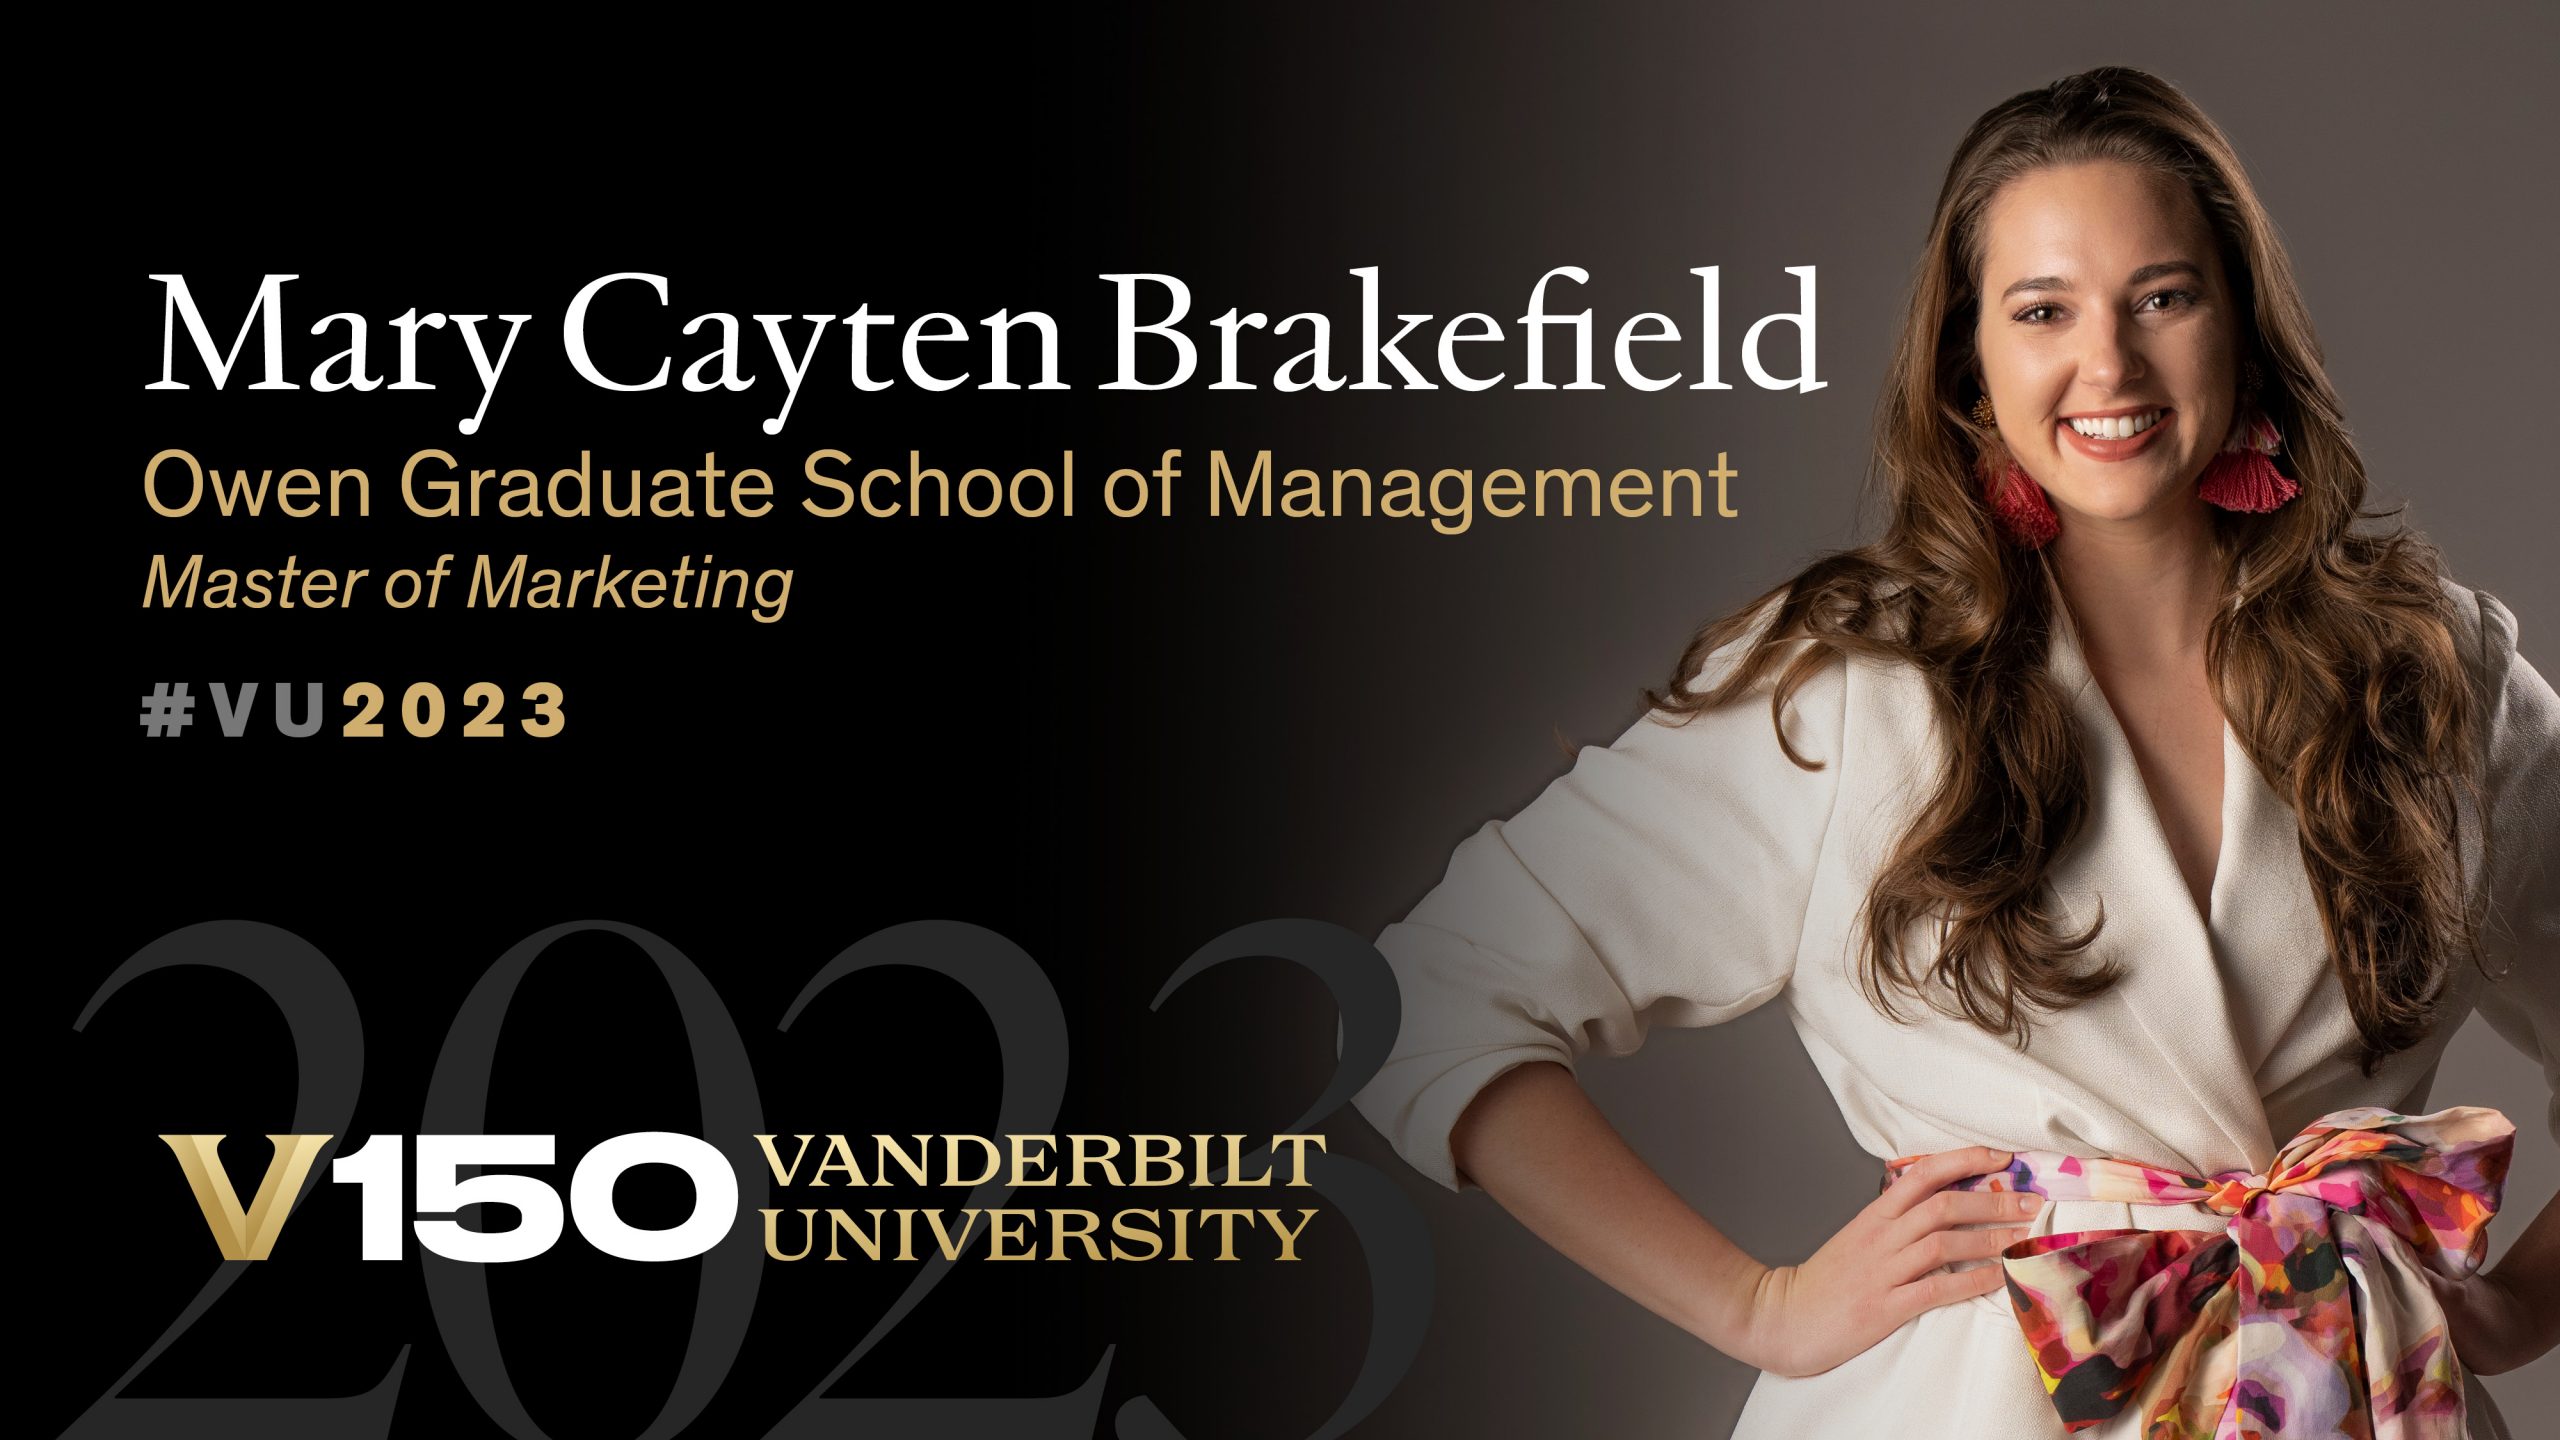 Class of 2023: Health challenges inspire Mary Cayten Brakefield to create fashion focused on inclusion